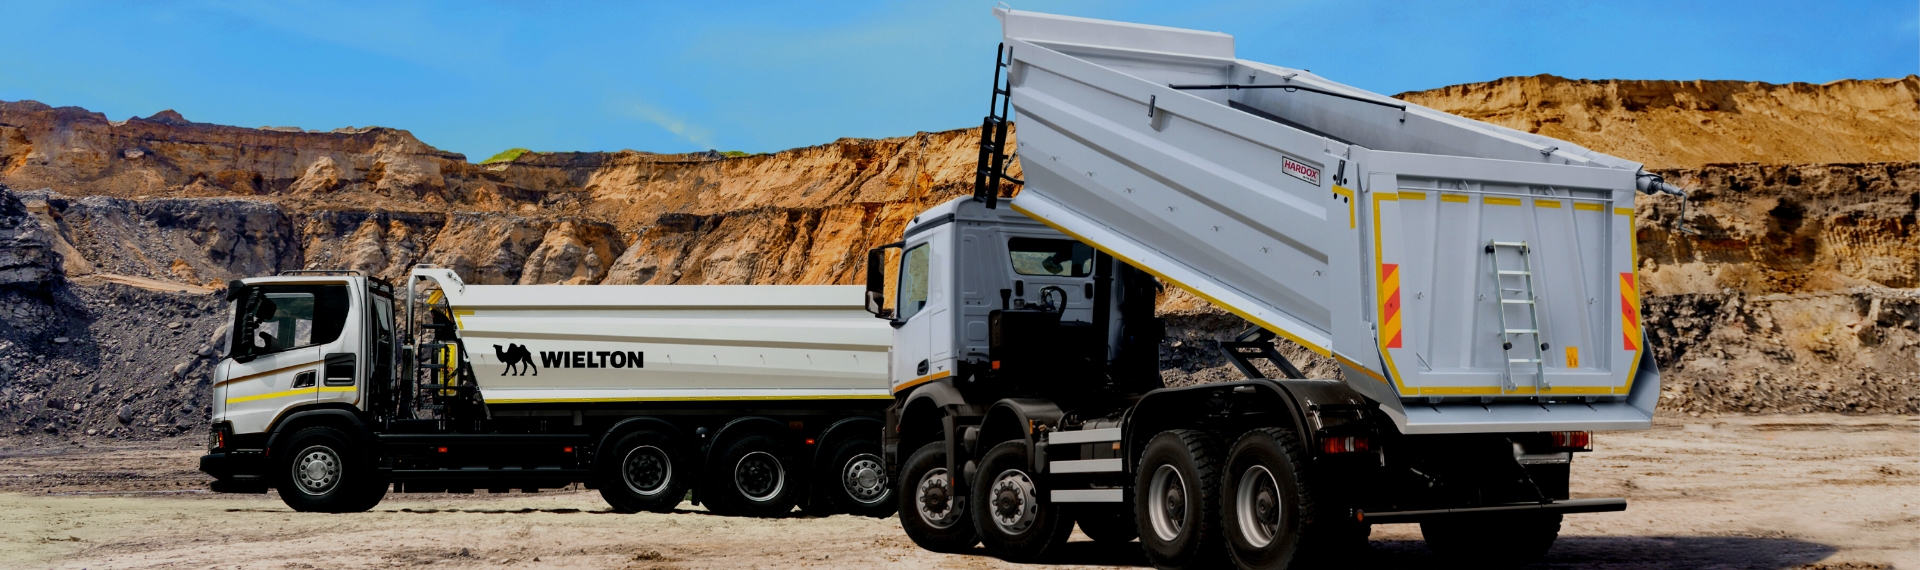 Two tipper trucks from Wielton in a mine, with the Hardox® In My Body sign on the bodies.